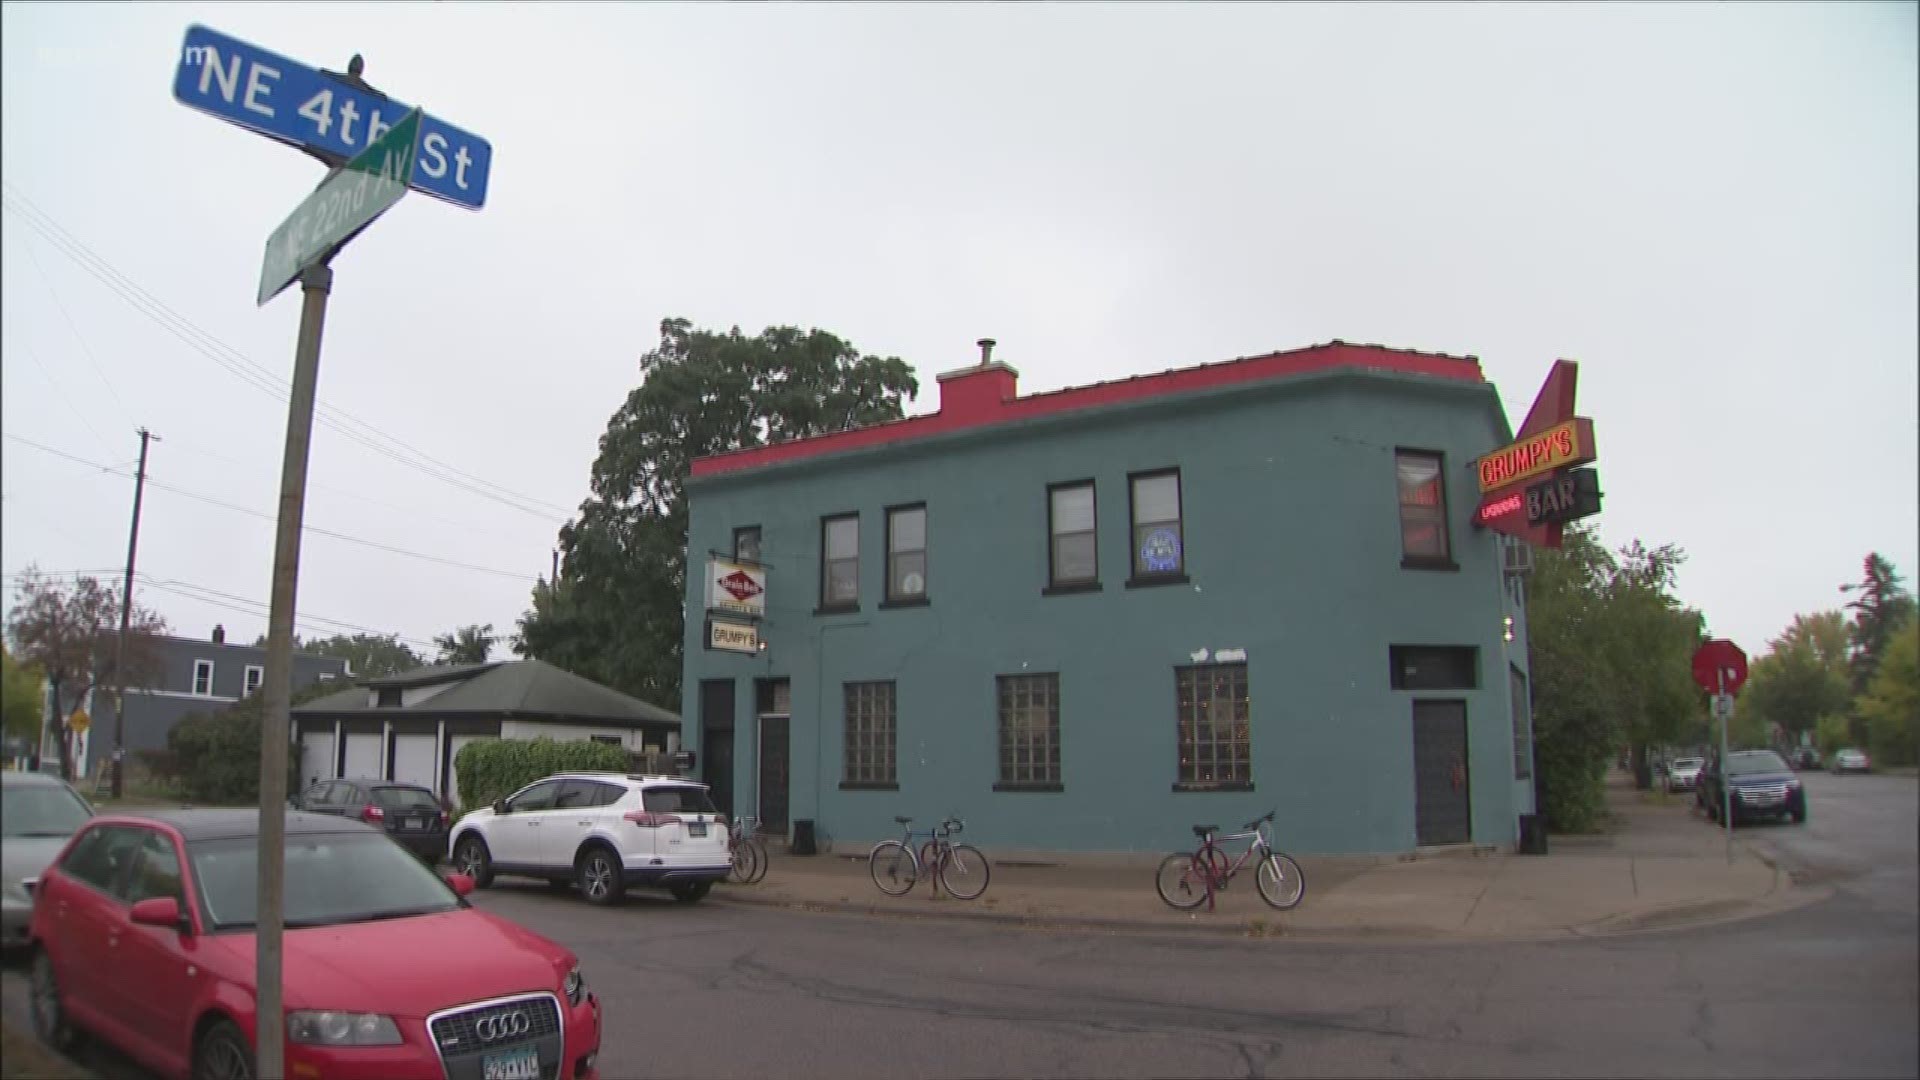 Minneapolis police are investigating other armed robberies, looking for connections to the shooting Friday night of a local musician in northeast Minneapolis. KARE 11's Lou Raguse has the latest. https://kare11.tv/2NwiODM